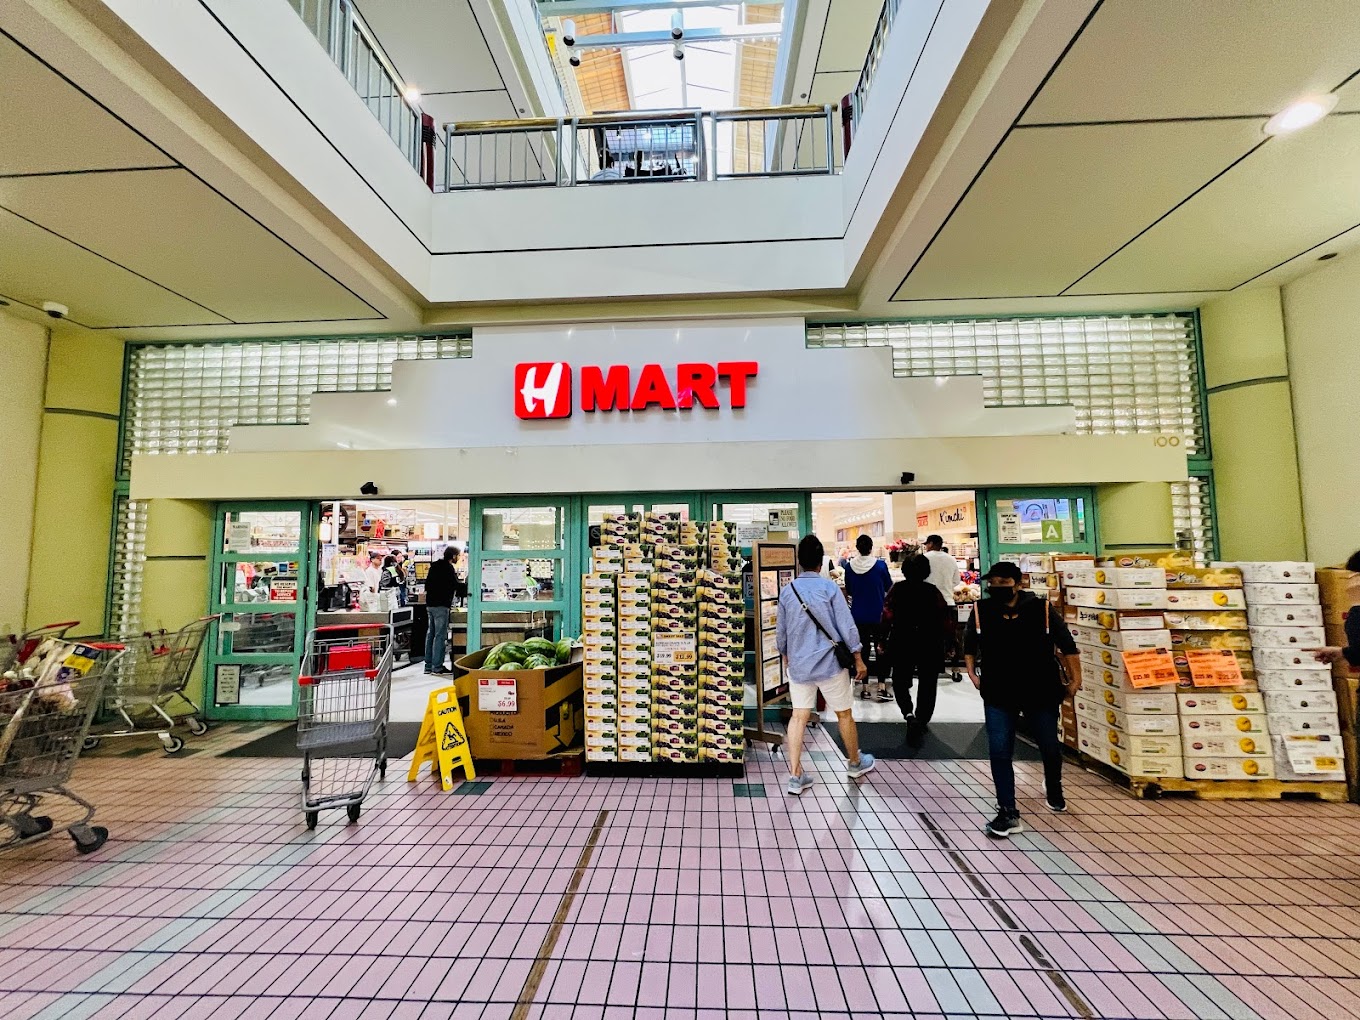 H Mart Koreatown Plaza An Asican Grocery Store in Los Angeles